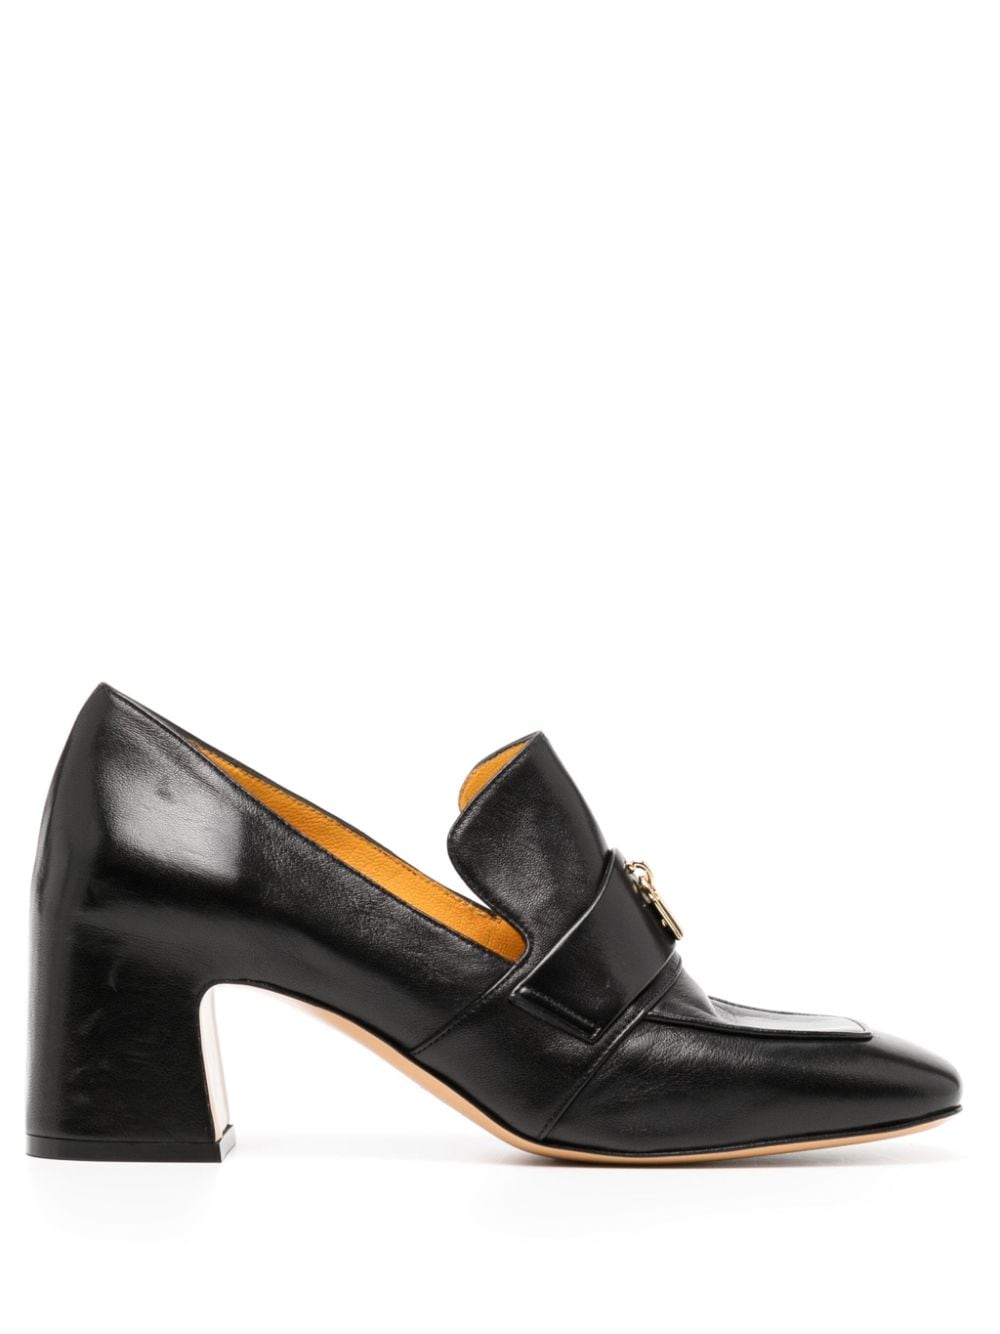 Madison.maison Lock 70mm Leather Pumps In Black